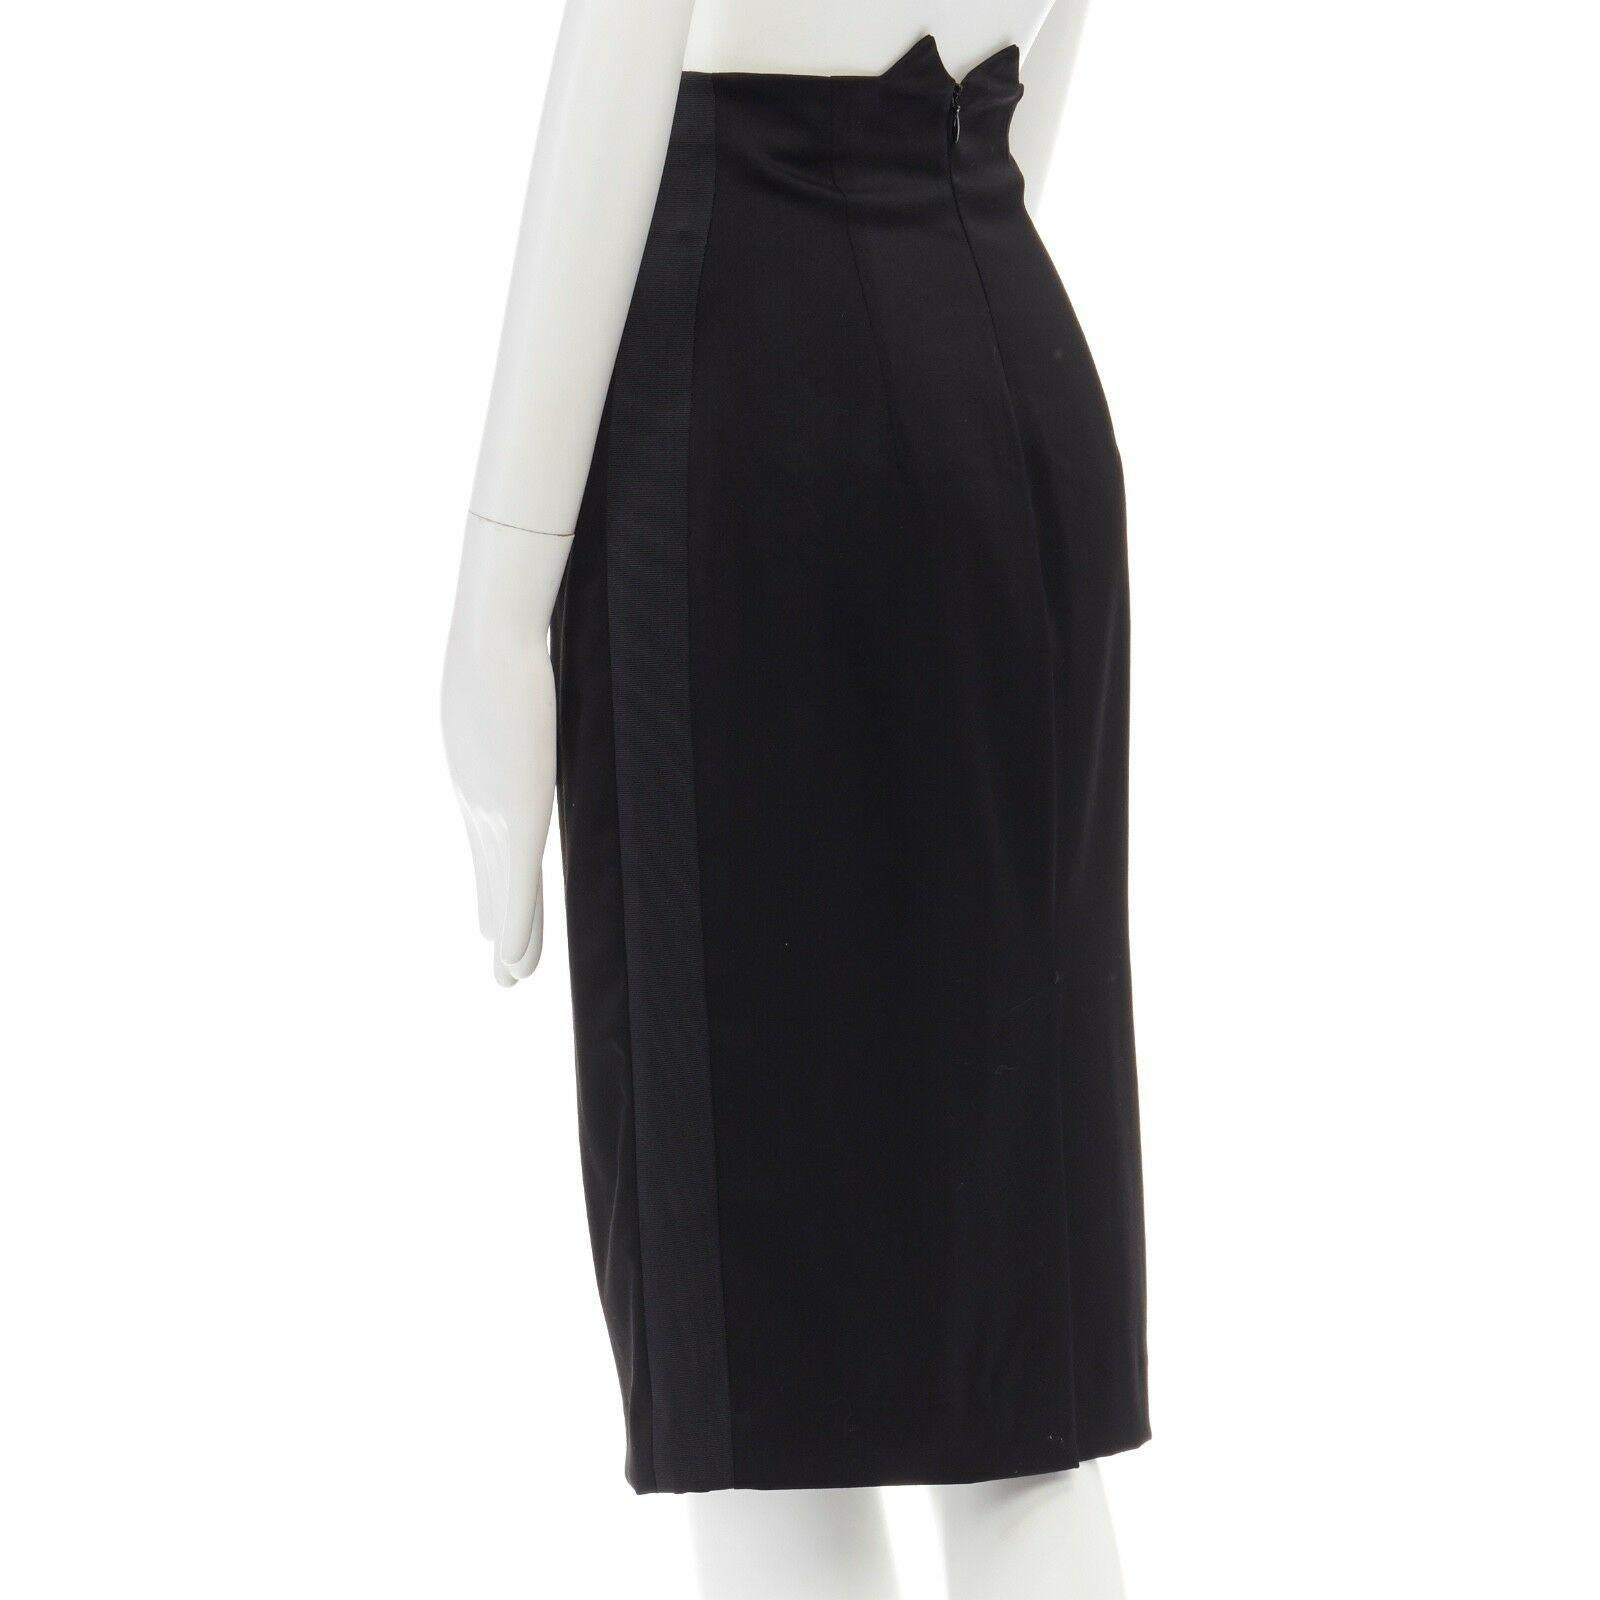 ALEXANDER MCQUEEN Vintage 2008 black military embroidered pencil skirt IT38 26